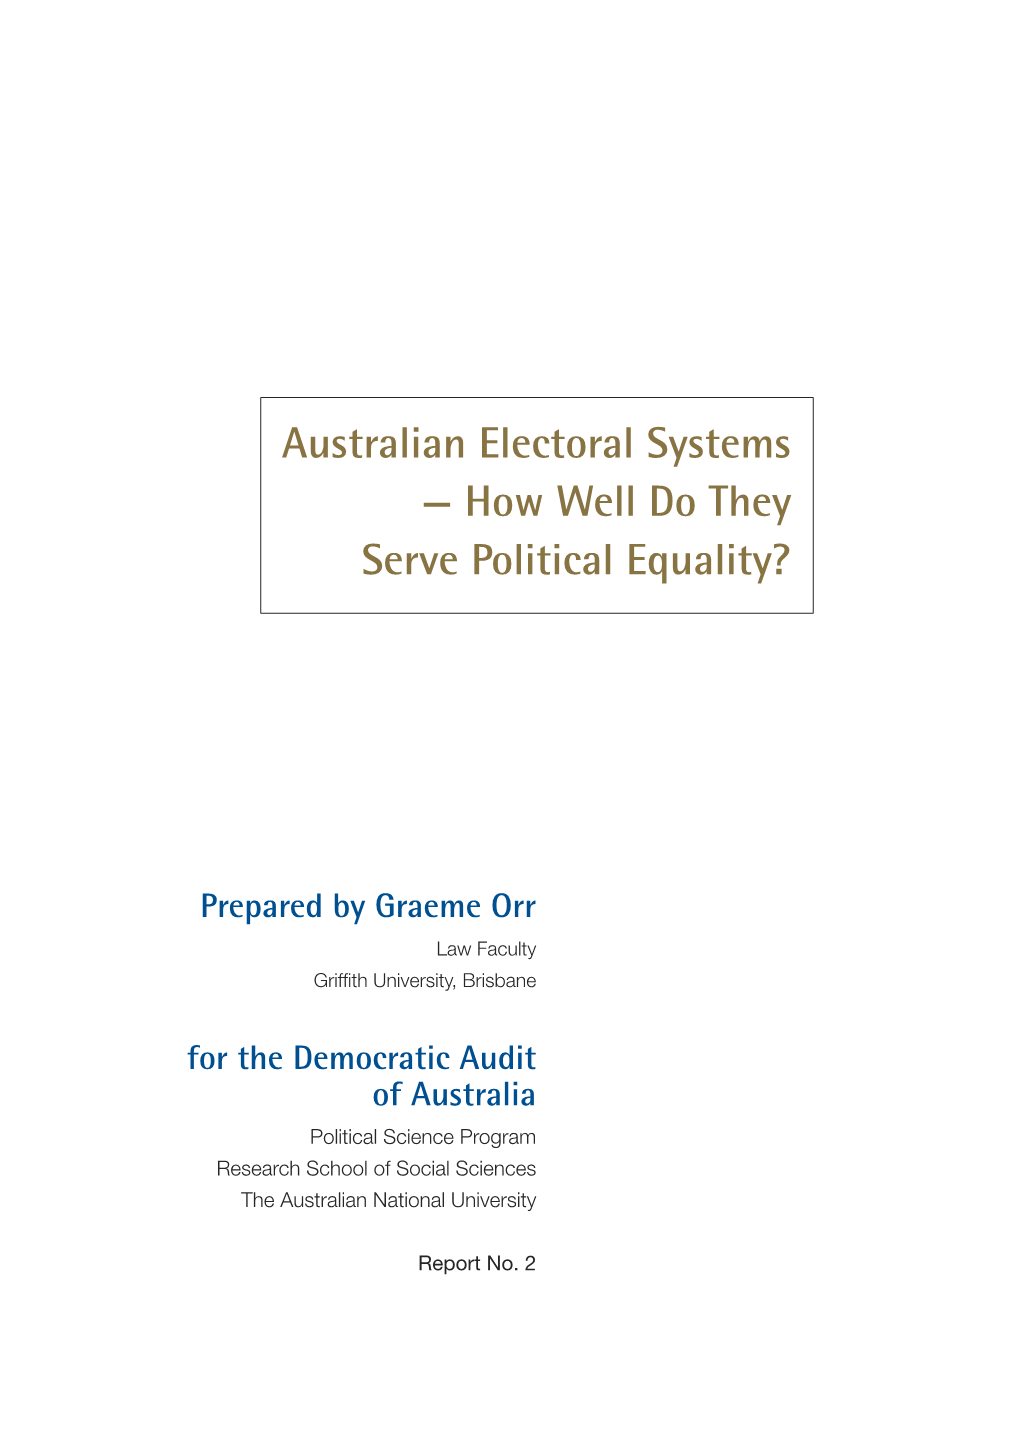 Australian Electoral Systems — How Well Do They Serve Political Equality?